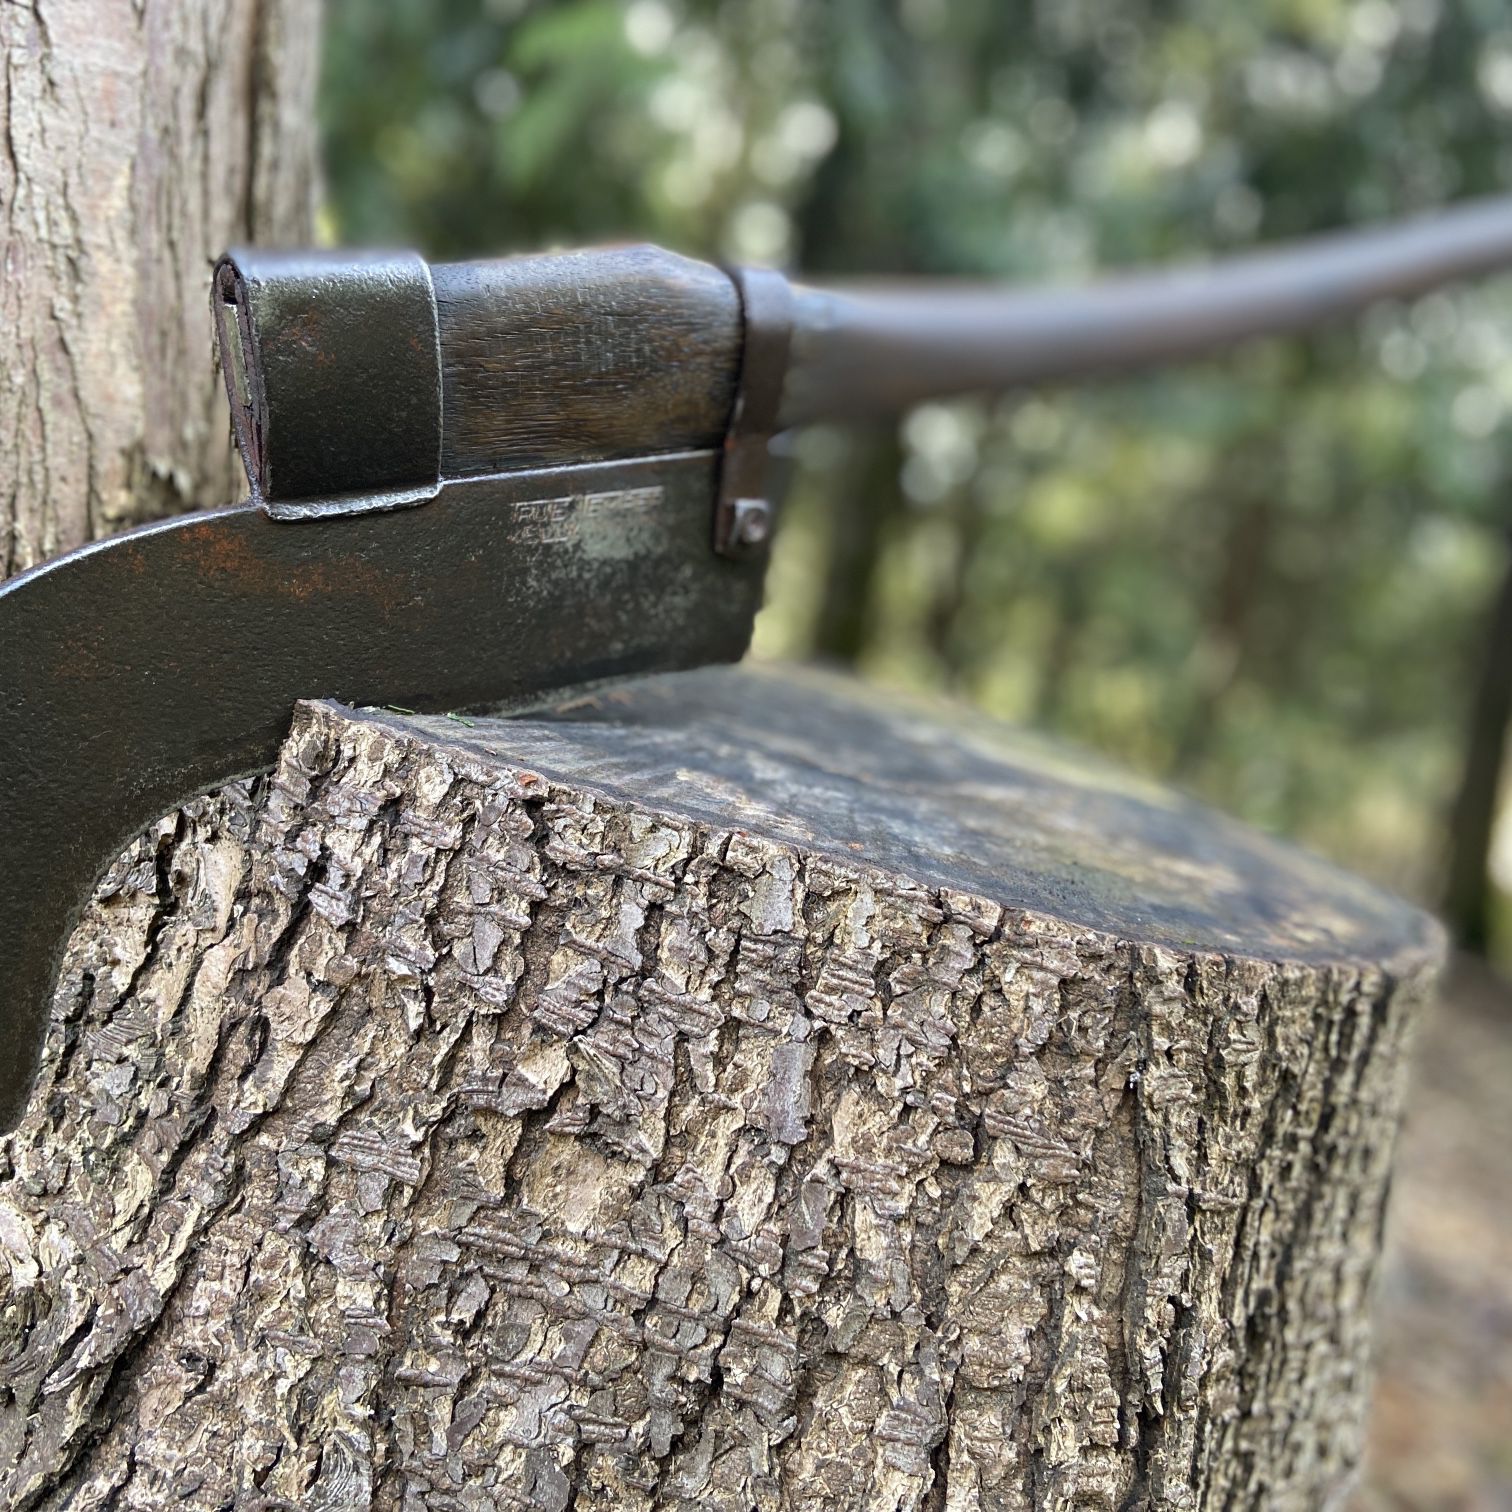 Brush Axe Kaiser Blade Sling Blade for Sale in Snohomish, WA